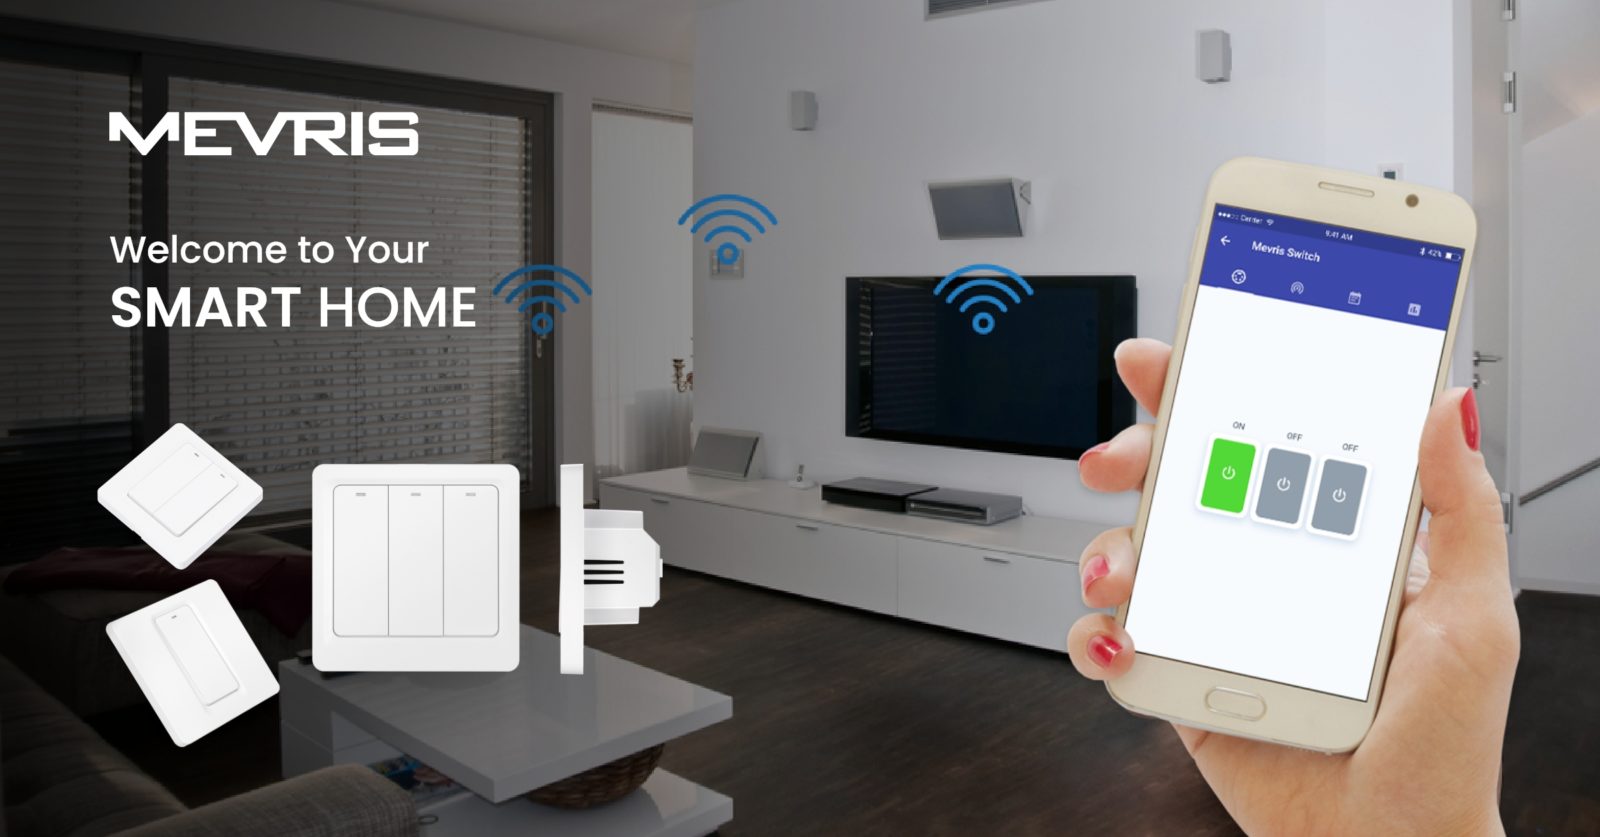 Mevris: Home Automation is the Innovative Future